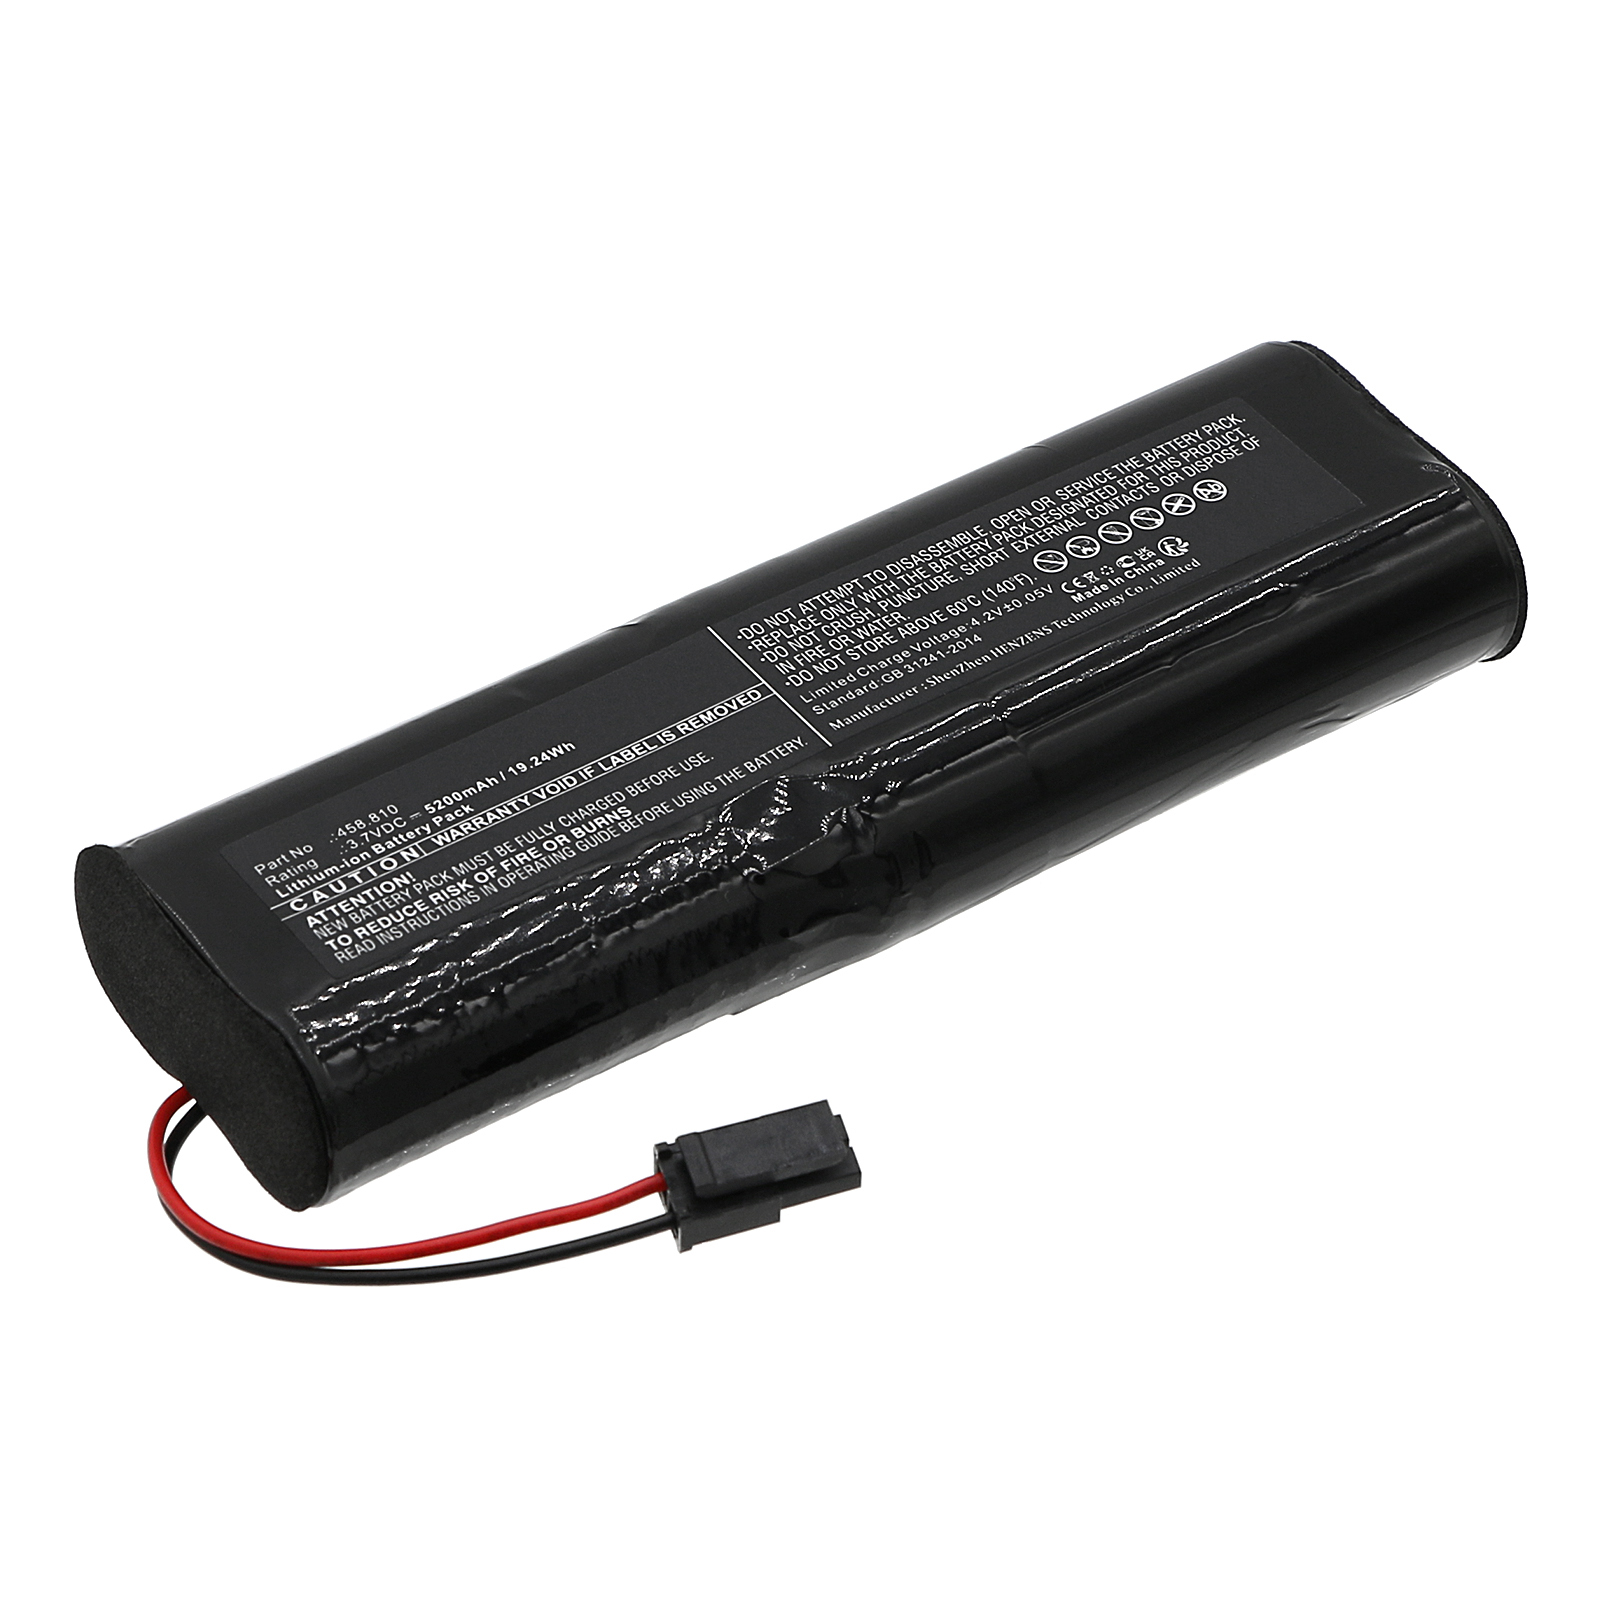 Synergy Digital Flashlight Battery, Compatible with Acculux 458.810 Flashlight Battery (Li-ion, 3.7V, 5200mAh)